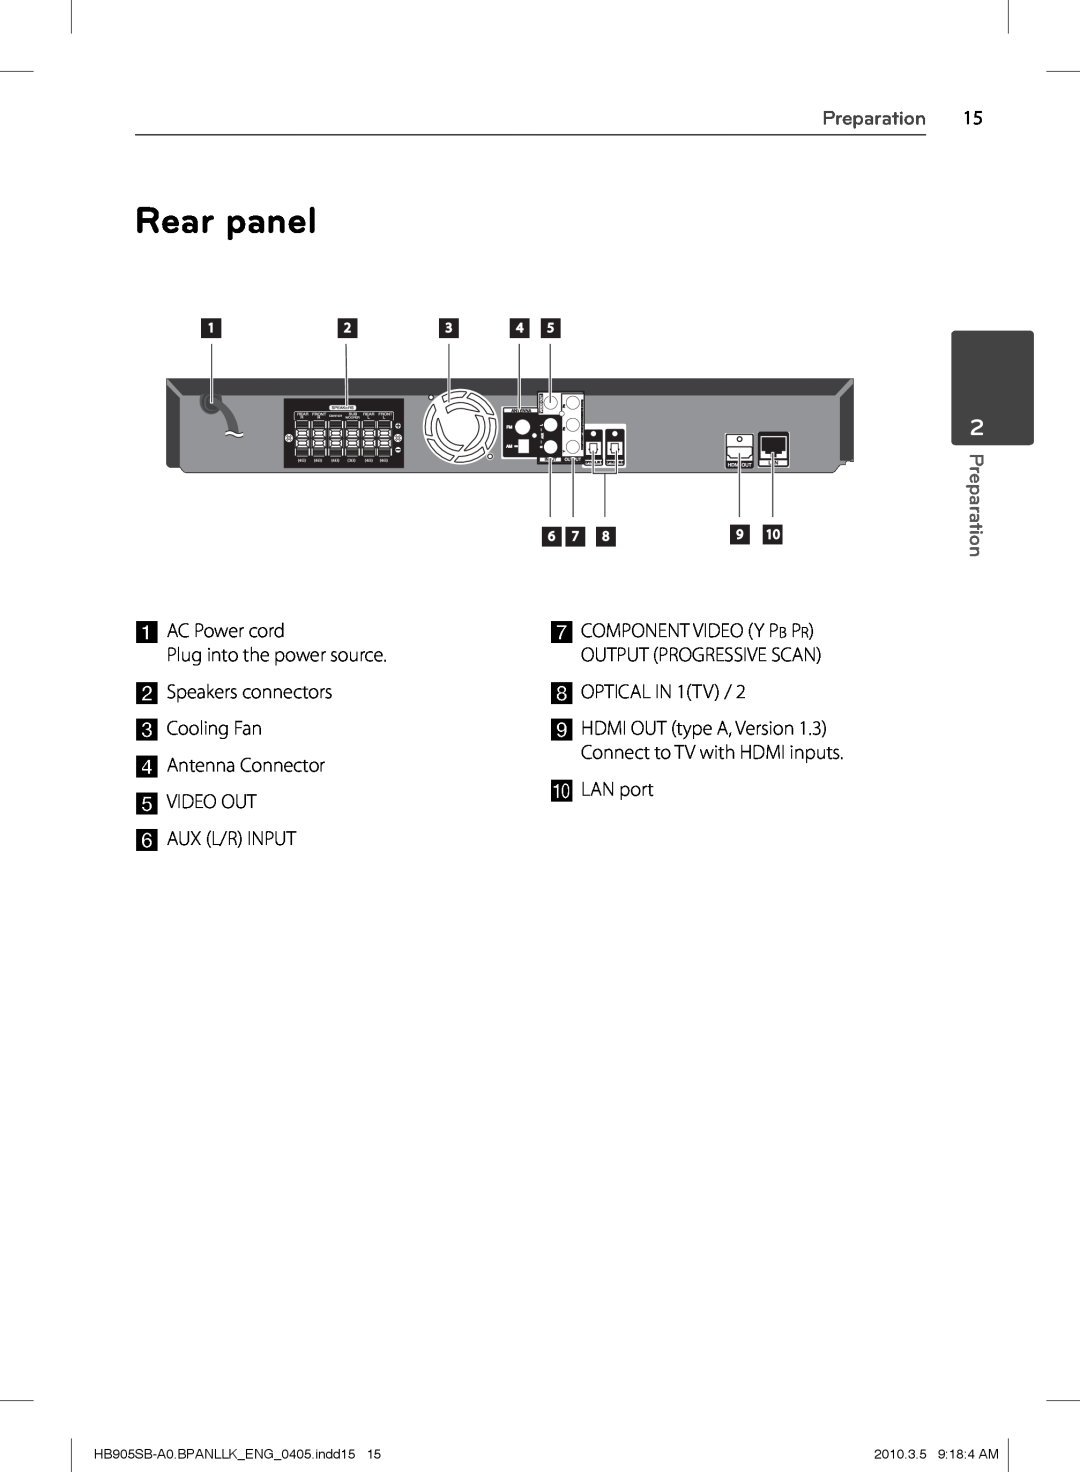 LG Electronics HB905SB Rear panel, Preparation, aAC Power cord Plug into the power source, hOPTICAL IN 1TV, jLAN port 